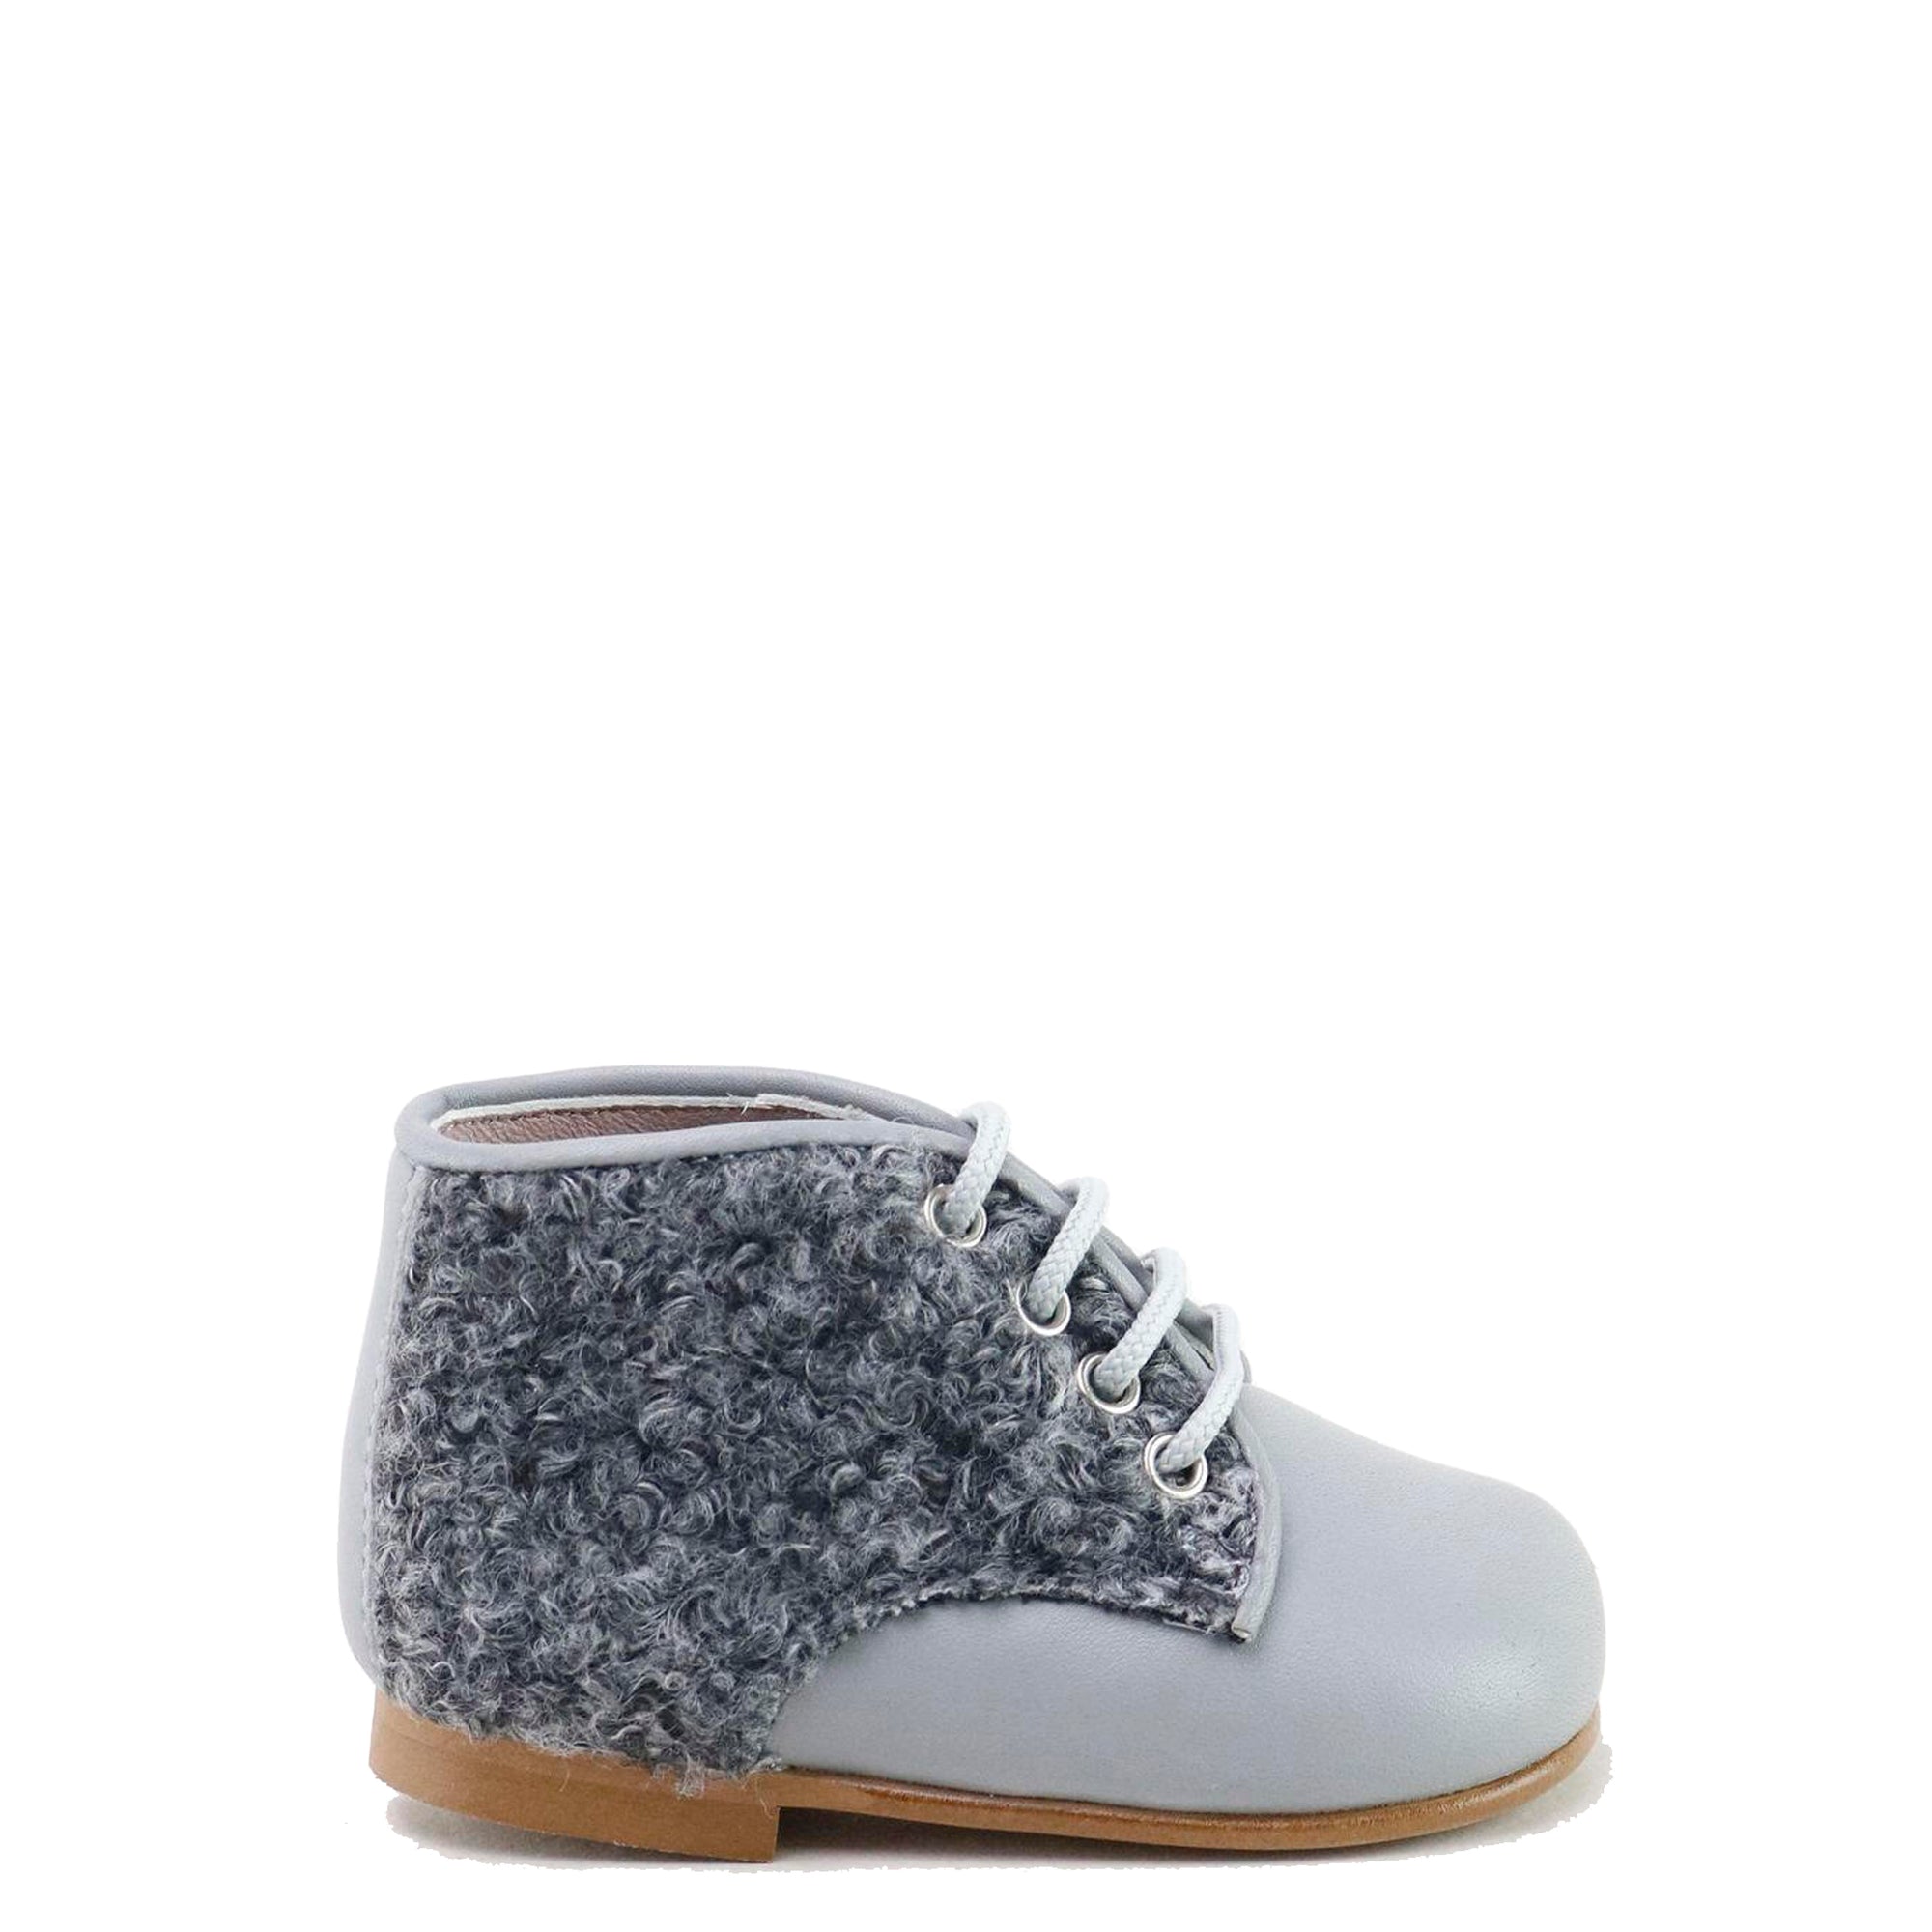 Papanatas Gray Shearling Baby Bootie-Tassel Children Shoes